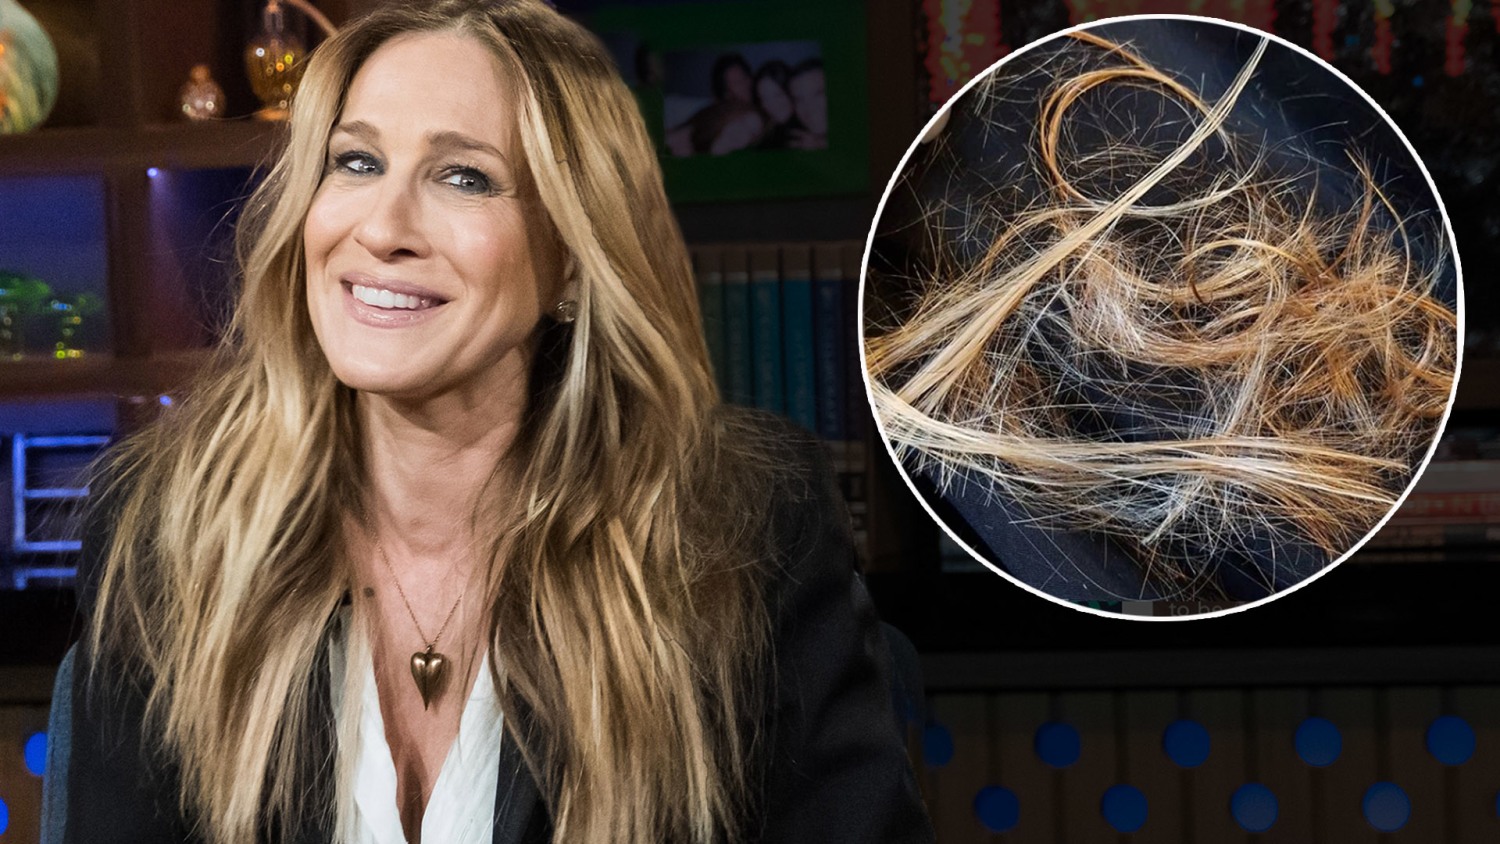 Sarah Jessica Parker just got bangs — see her new look!